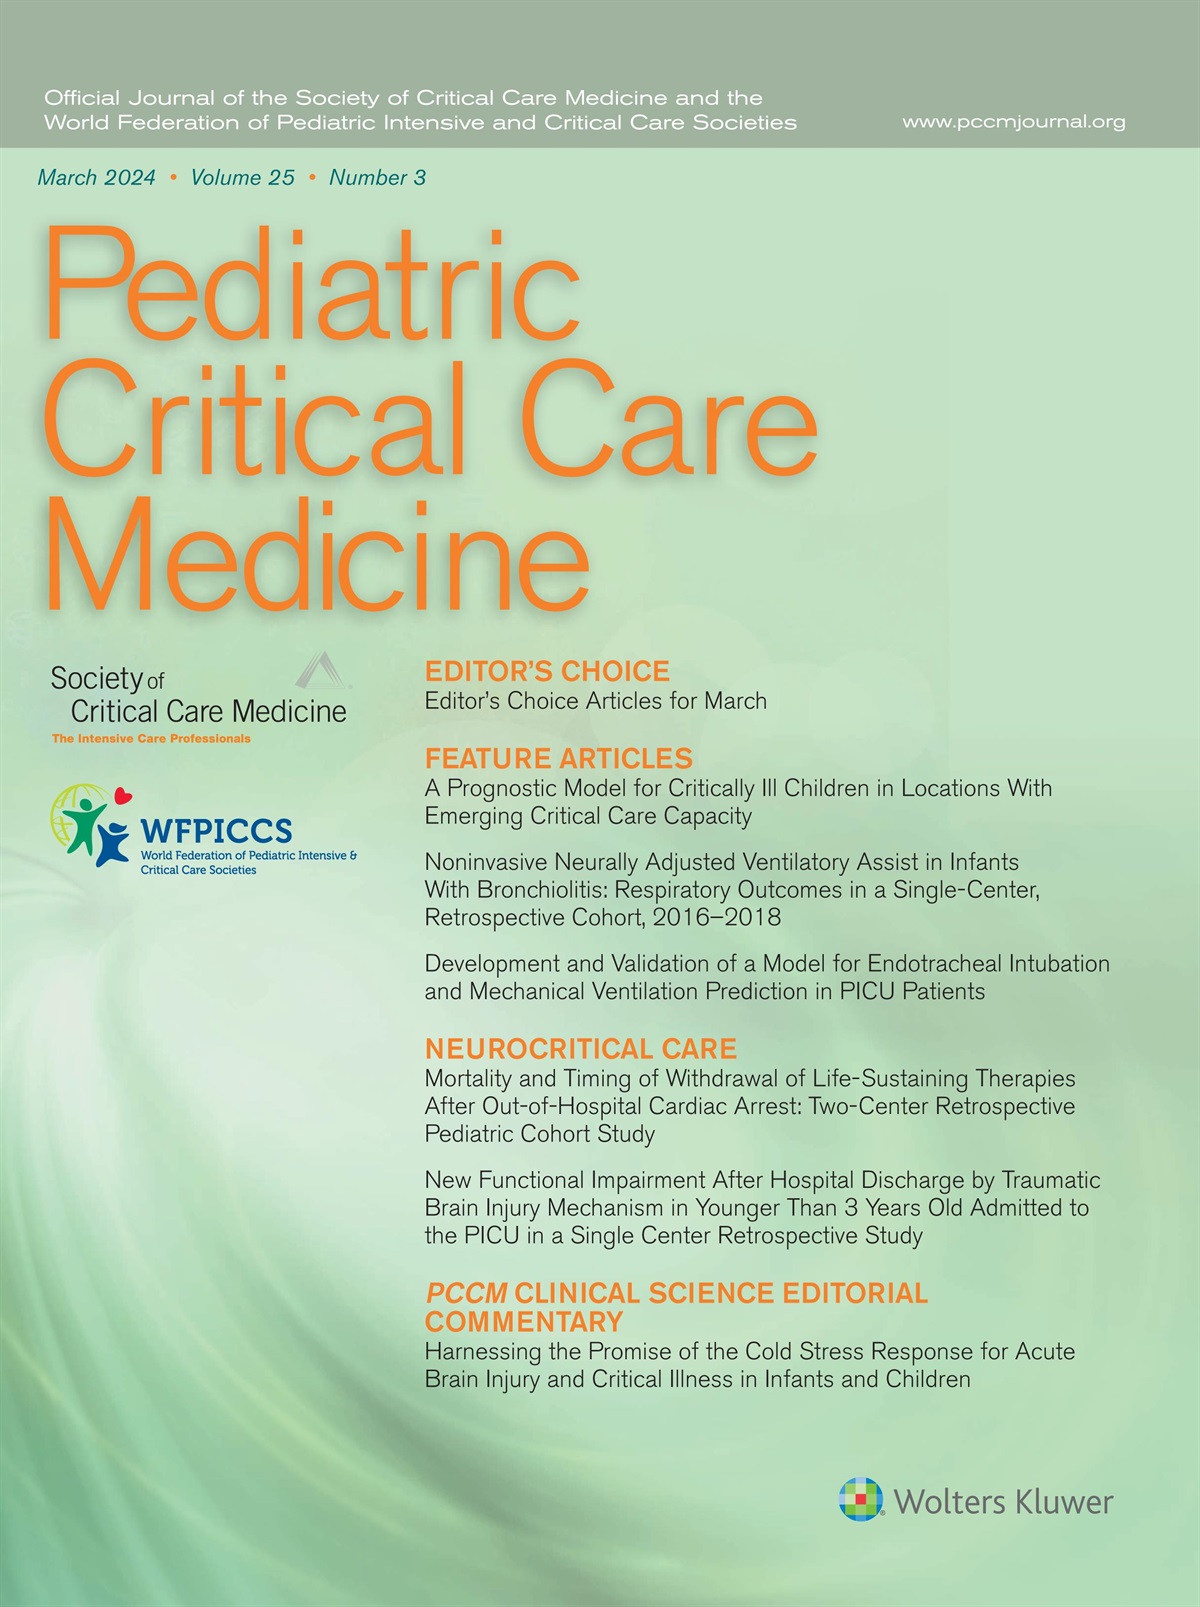 About the Second International Guidelines for the Diagnosis and Management of Pediatric Acute Respiratory Distress Syndrome